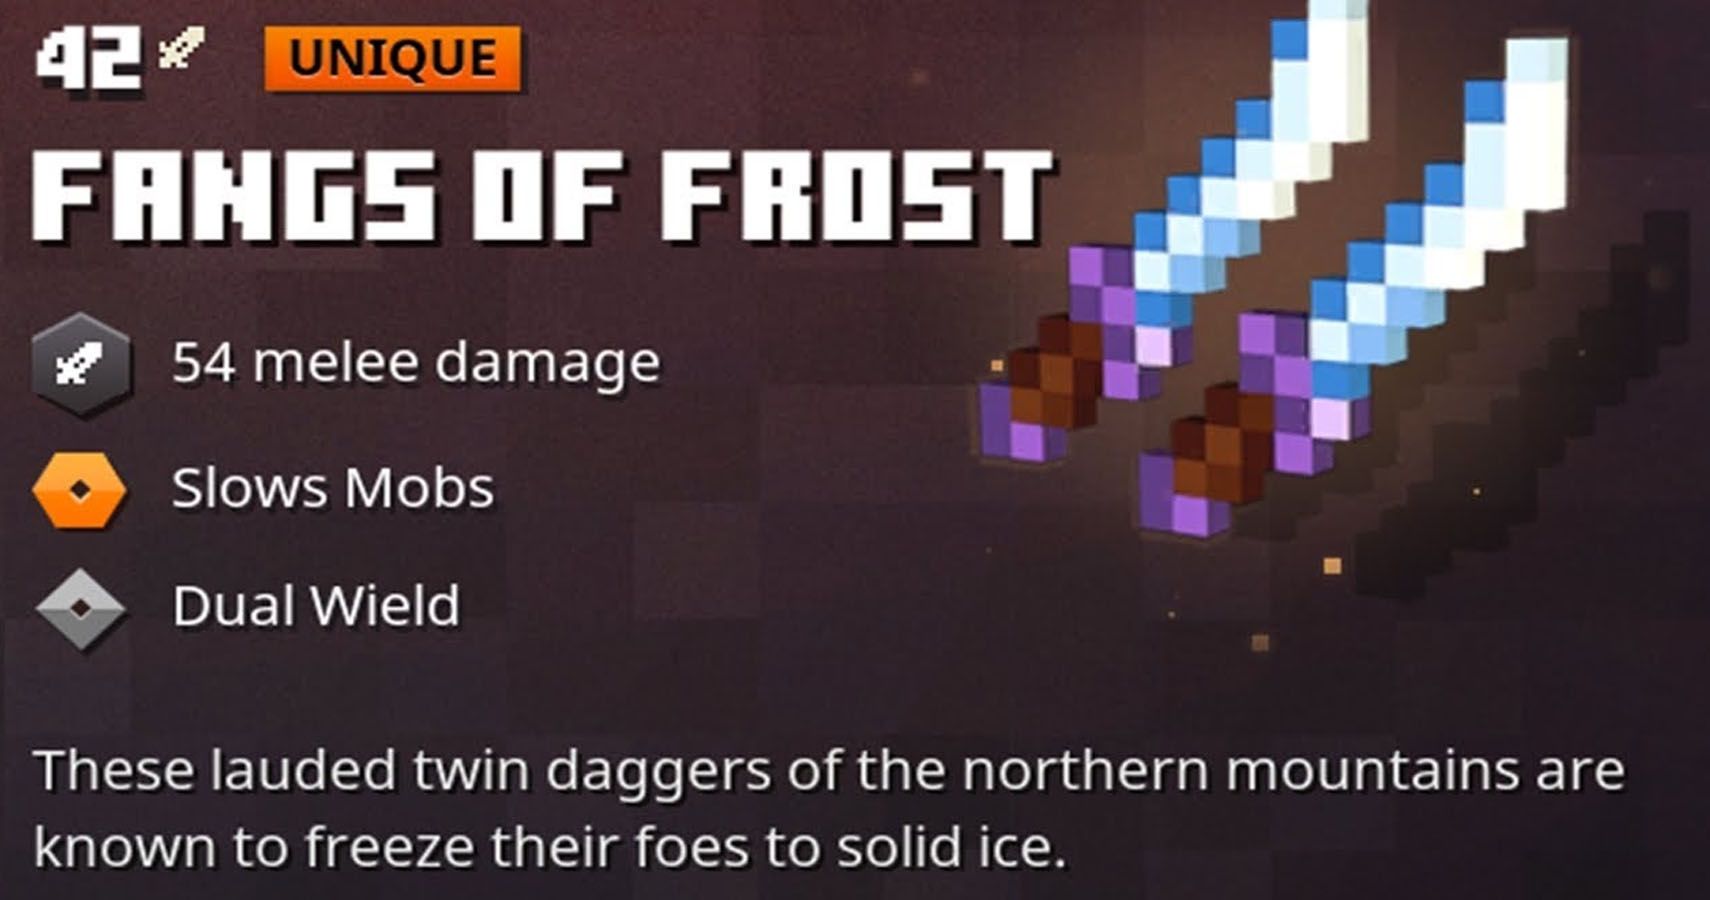 Fangs of Frosts stats